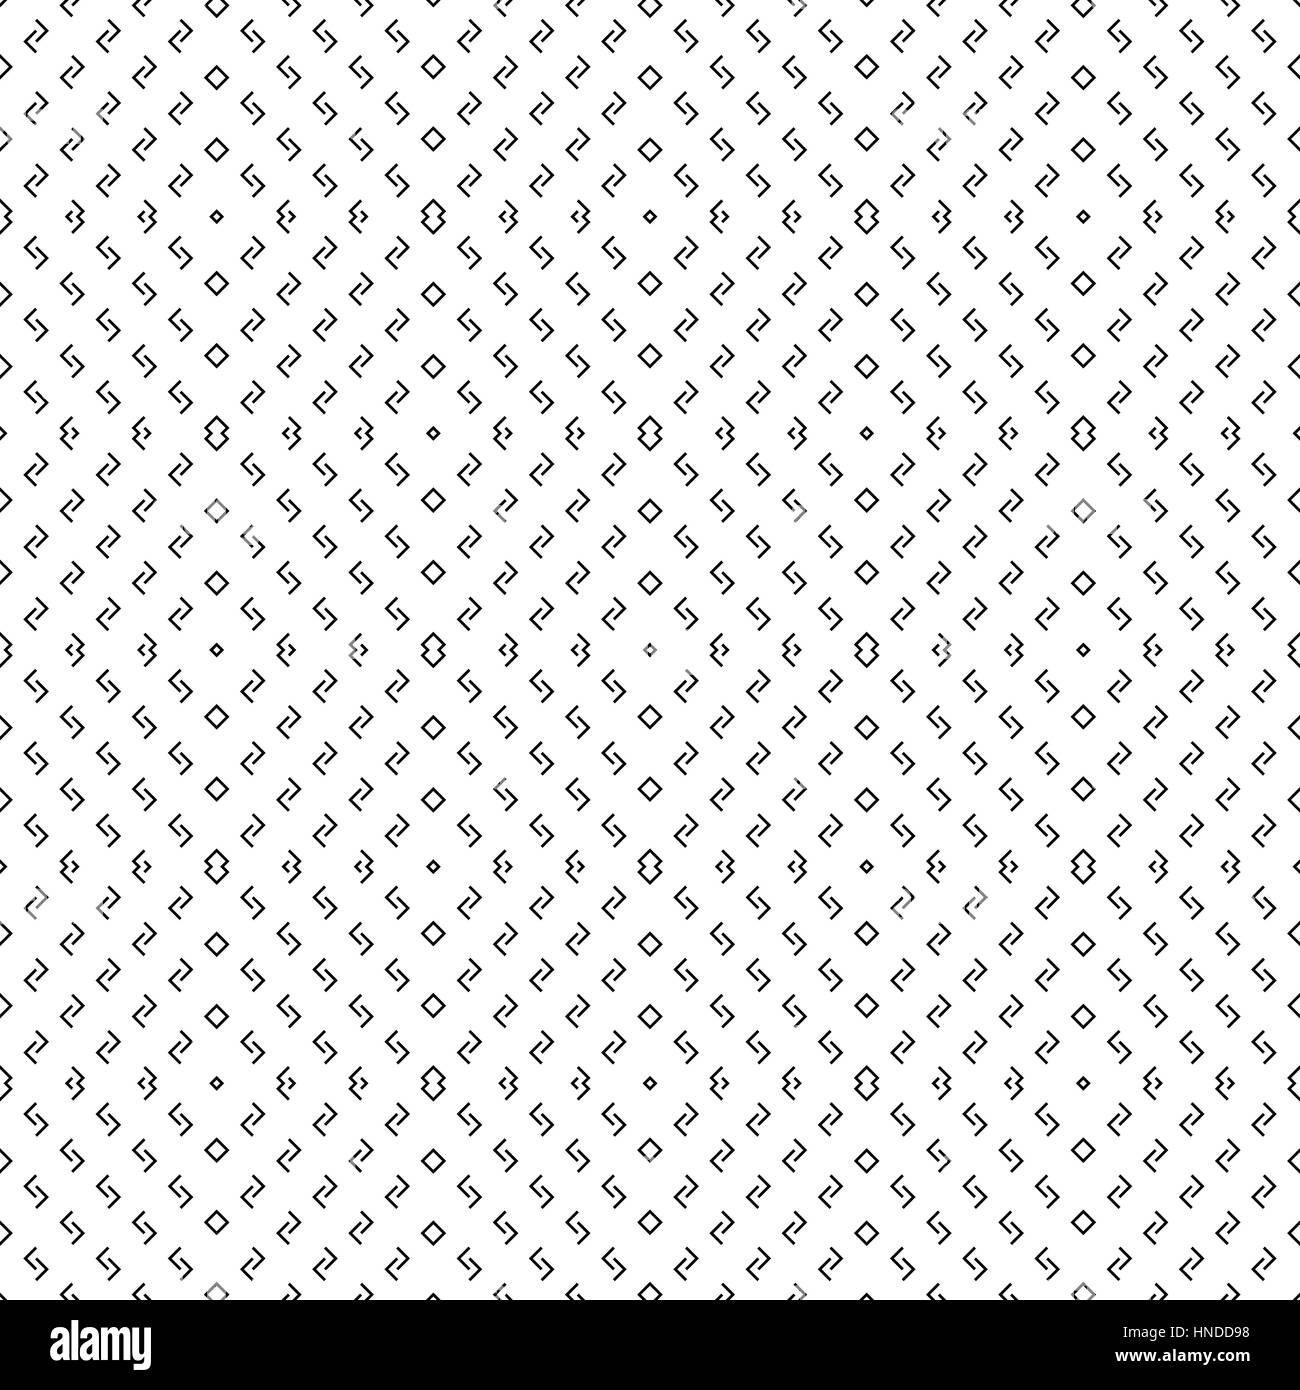 Seamless pattern. Elegant geometric texture. Repeating geometrical shapes, corners, squares, rhombuses. Small textured surface. Monochrome. Backdrop.  Stock Vector